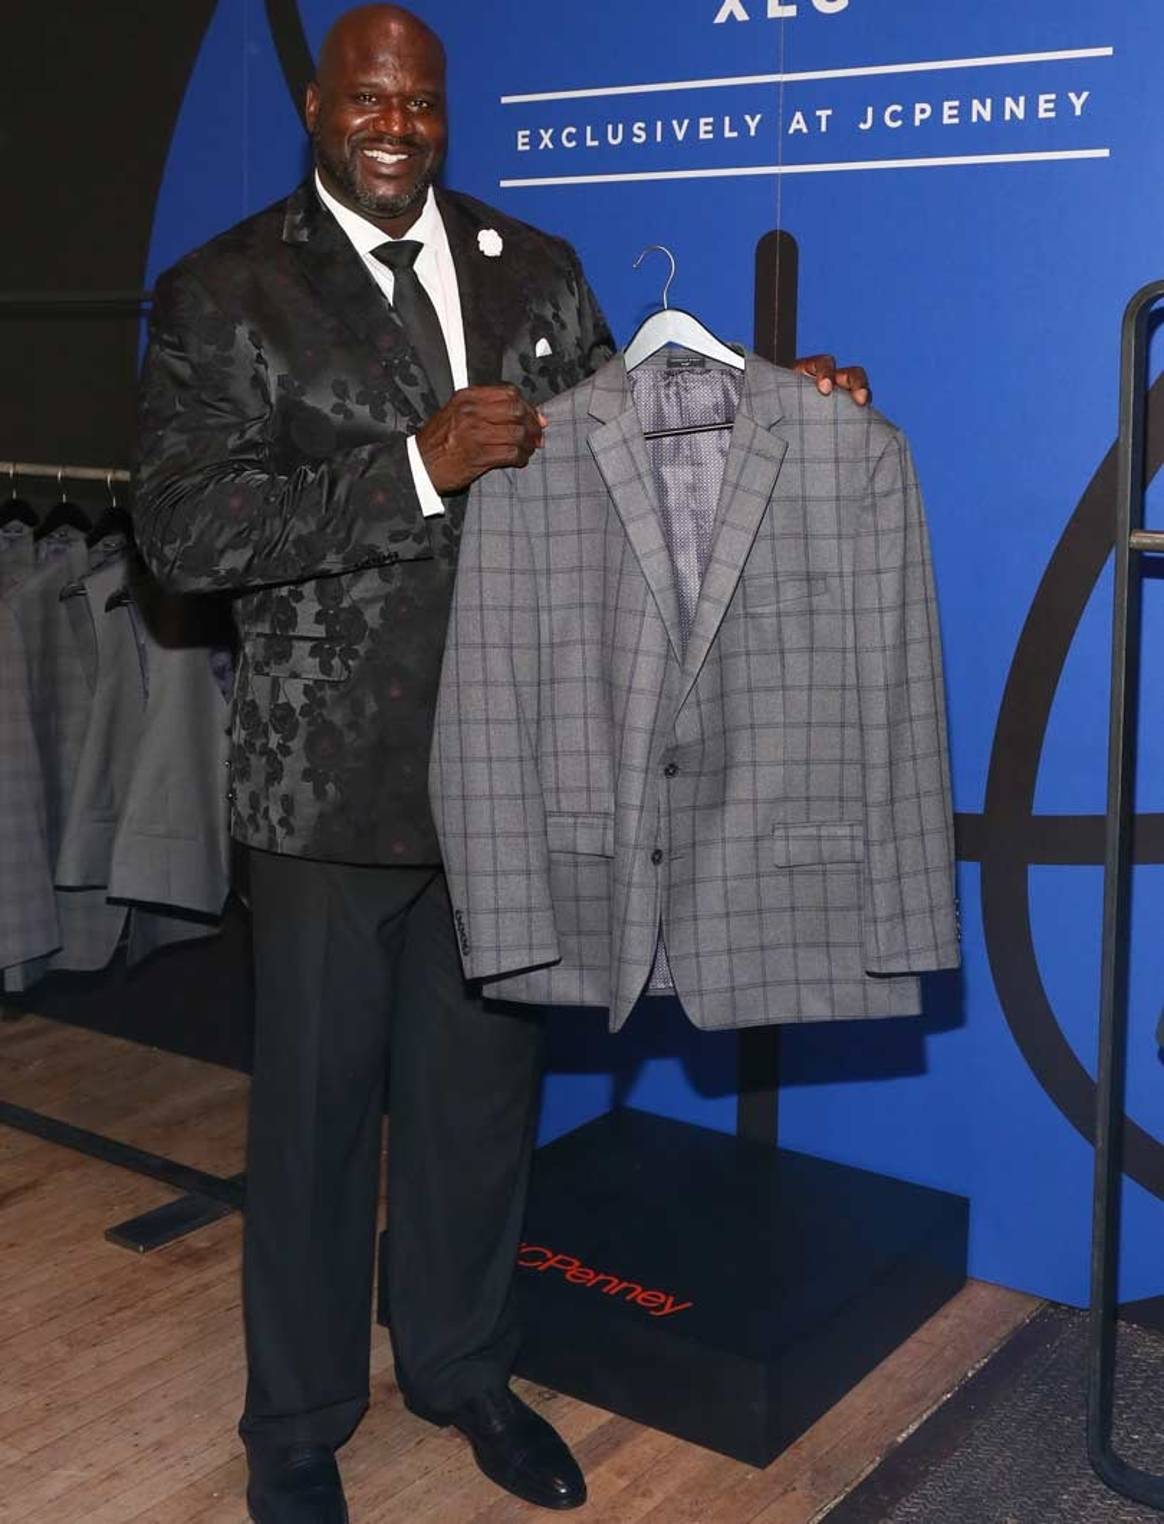 Shaquille O'Neal launches big & tall collection with JCPenney